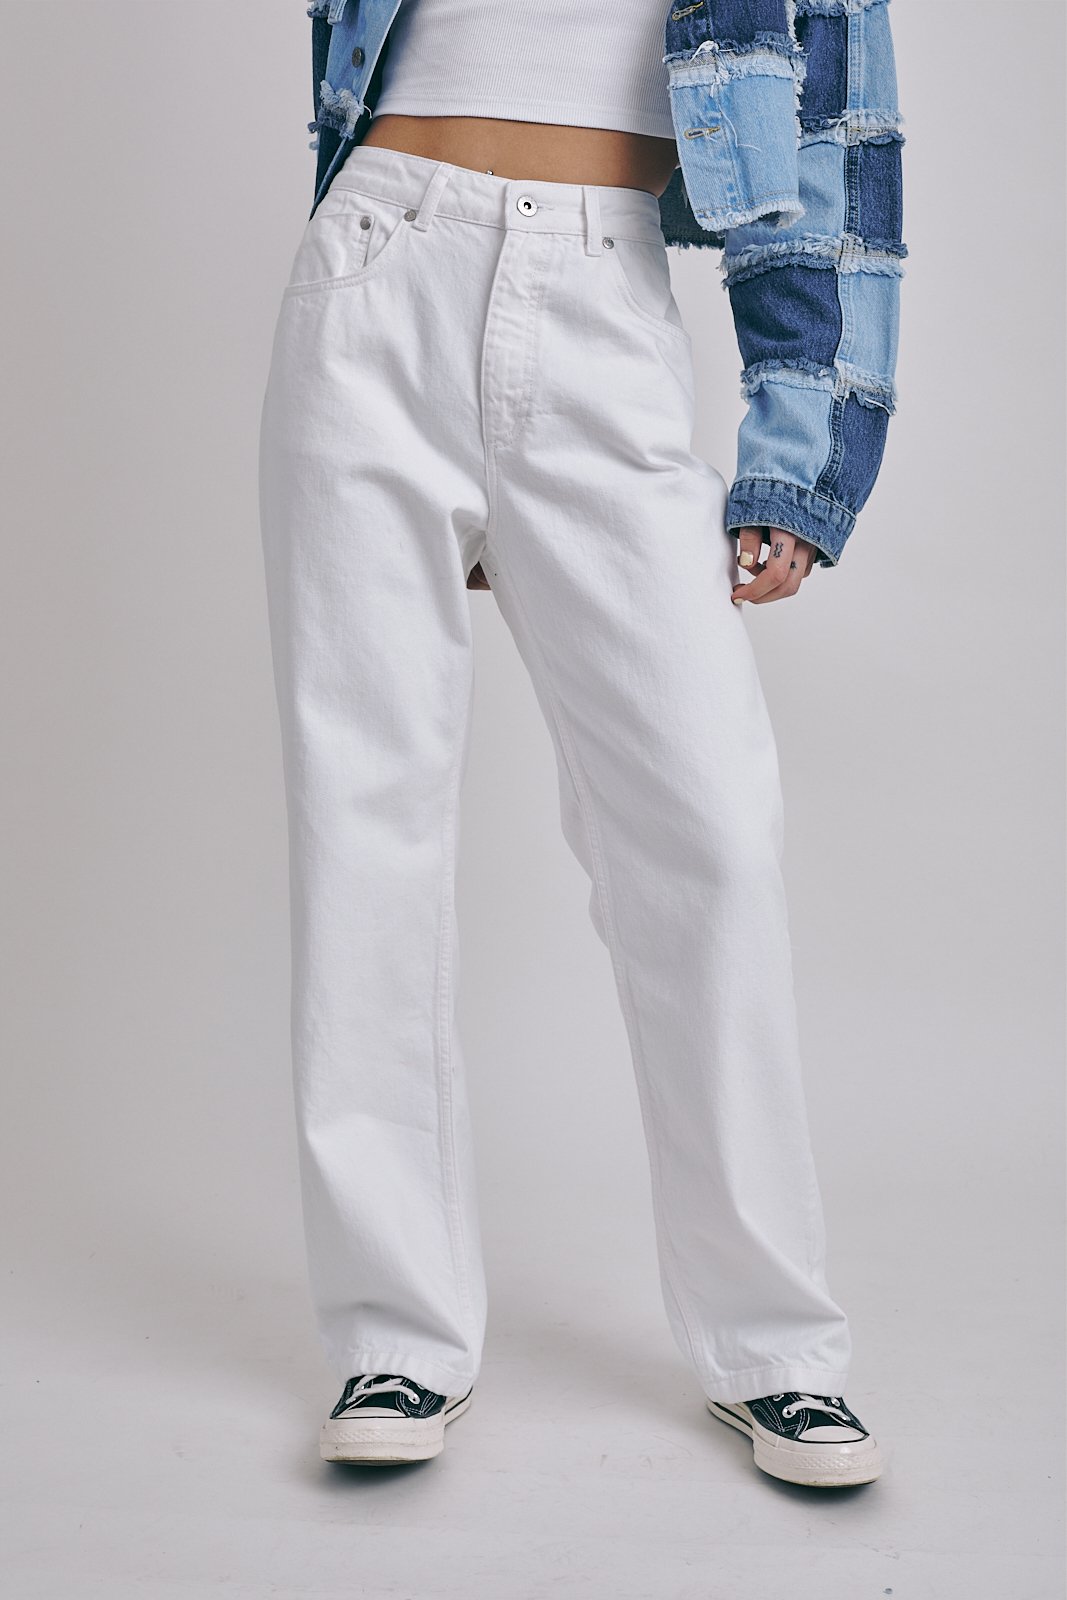 DAD DENIM - WHITE - EXCLUSIVE Denim from THE RAGGED PRIEST - Just $63.00! SHOP NOW AT IAMINHATELOVE BOTH IN STORE FOR CYPRUS AND ONLINE WORLDWIDE